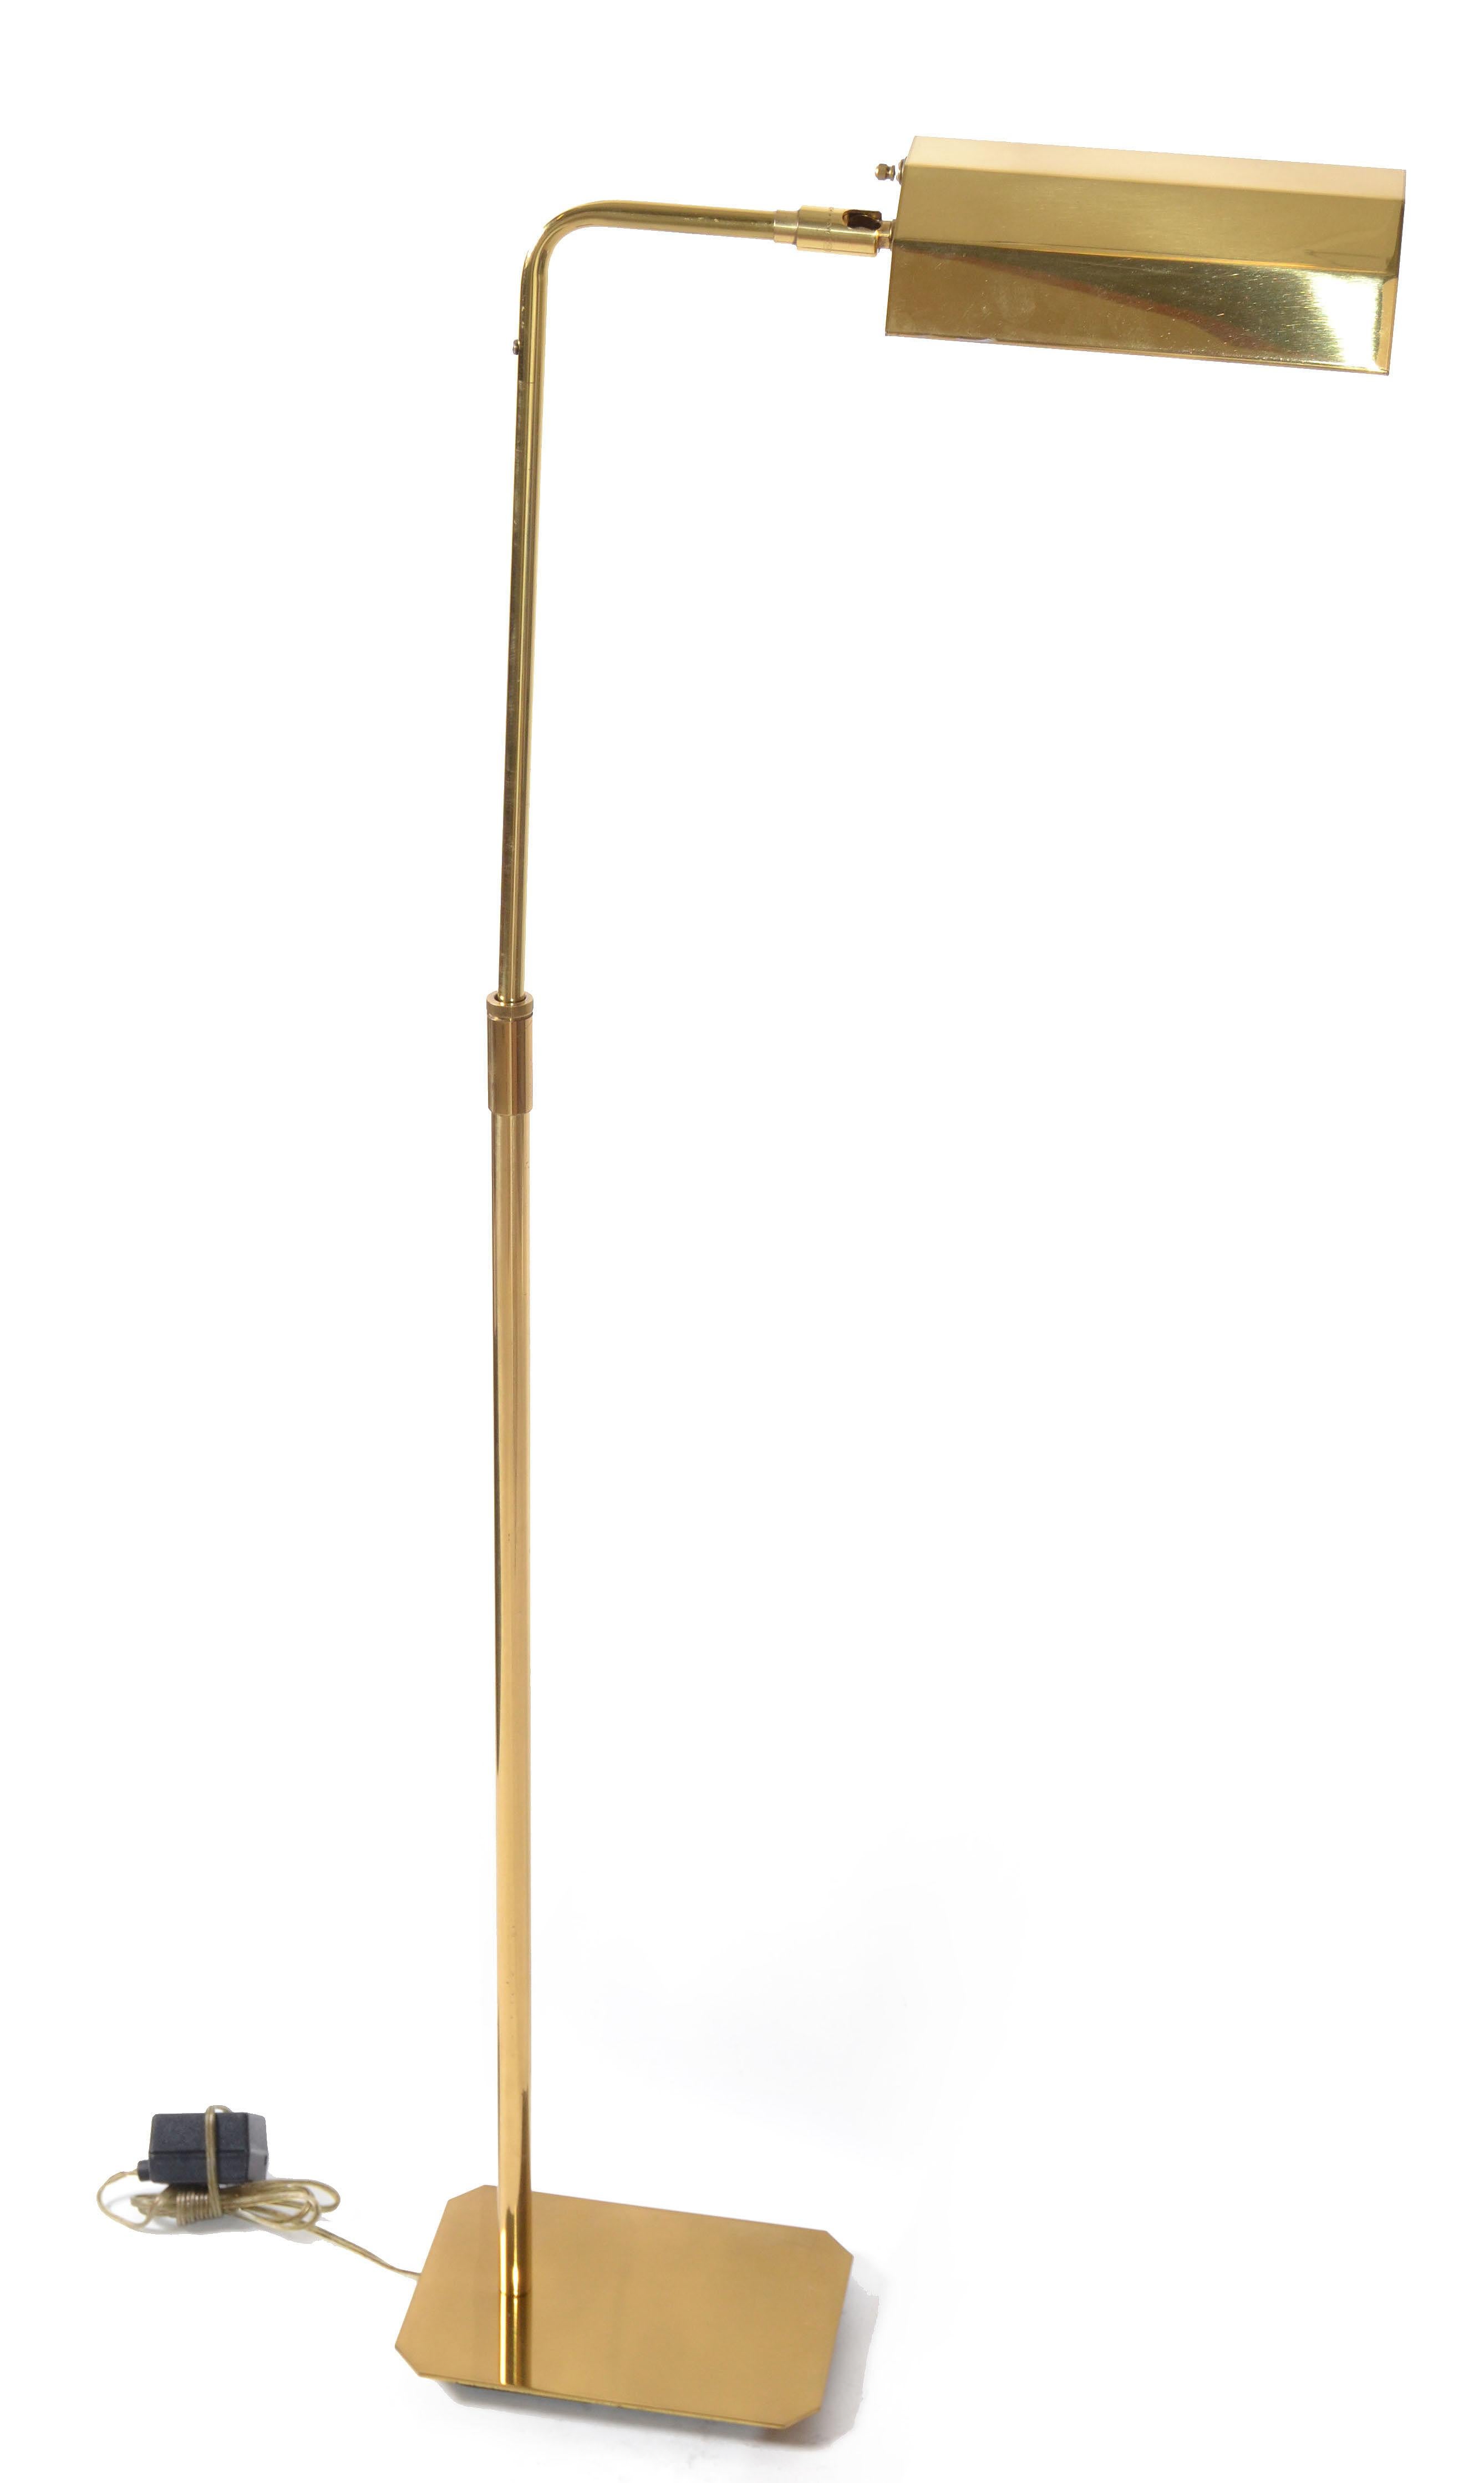 This polished brass floor lamp, was made by the esteemed American Company Koch & Lowy, that designed all forms of lighting, from table, to floor lamps, and chandeliers. 
It is best known and recognized by these floor lamps, that came in varying